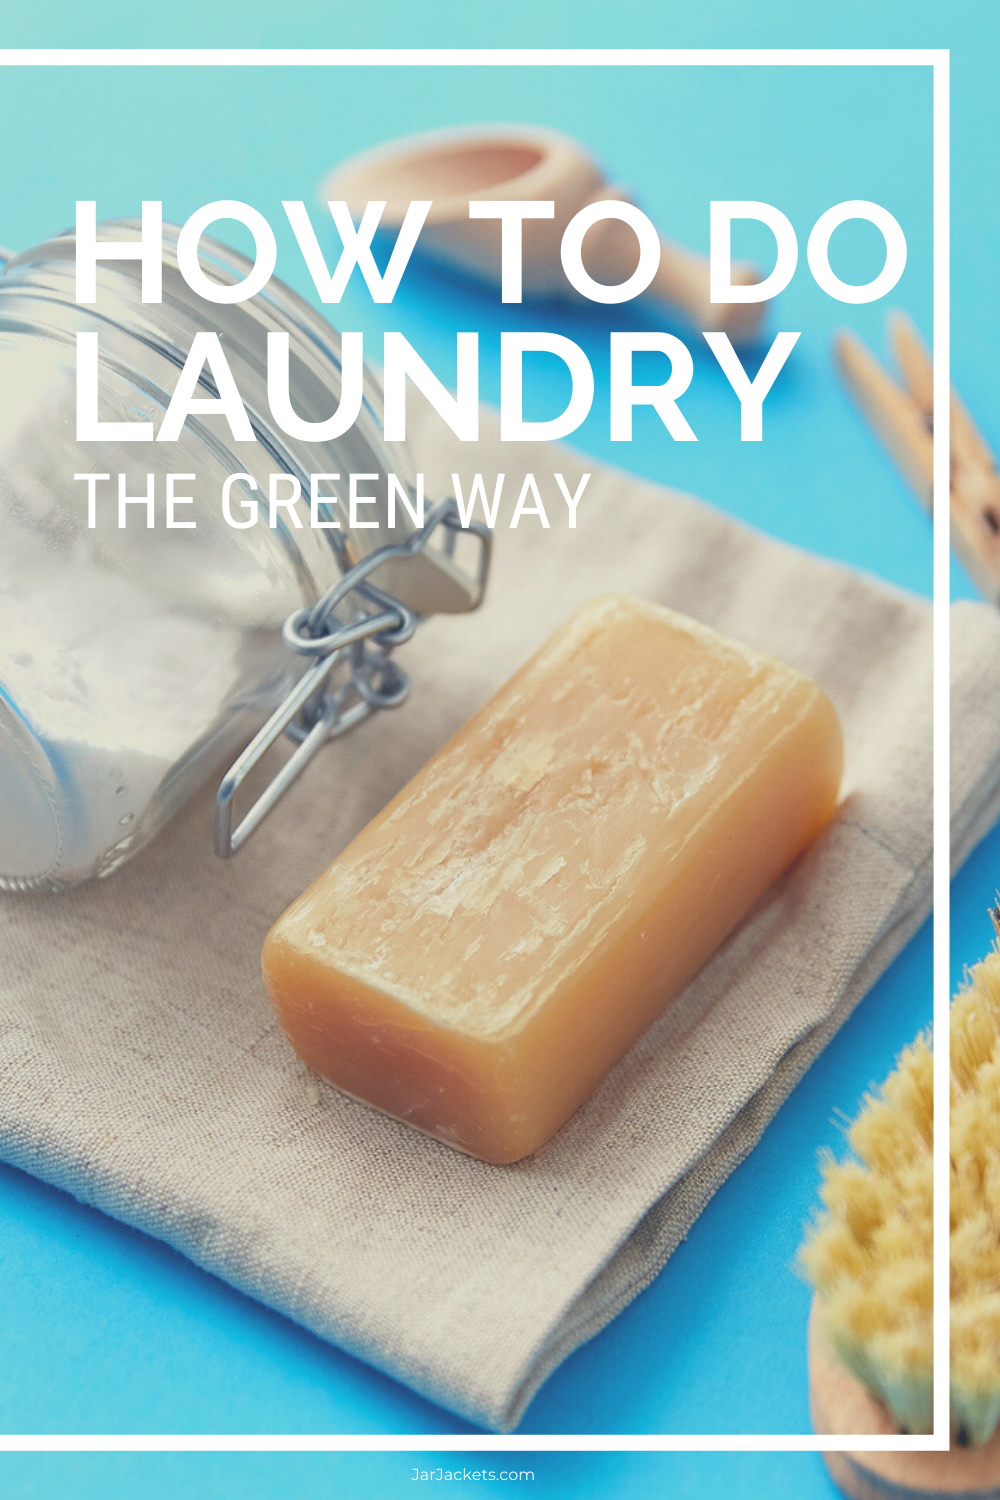 How to do laundry the green way